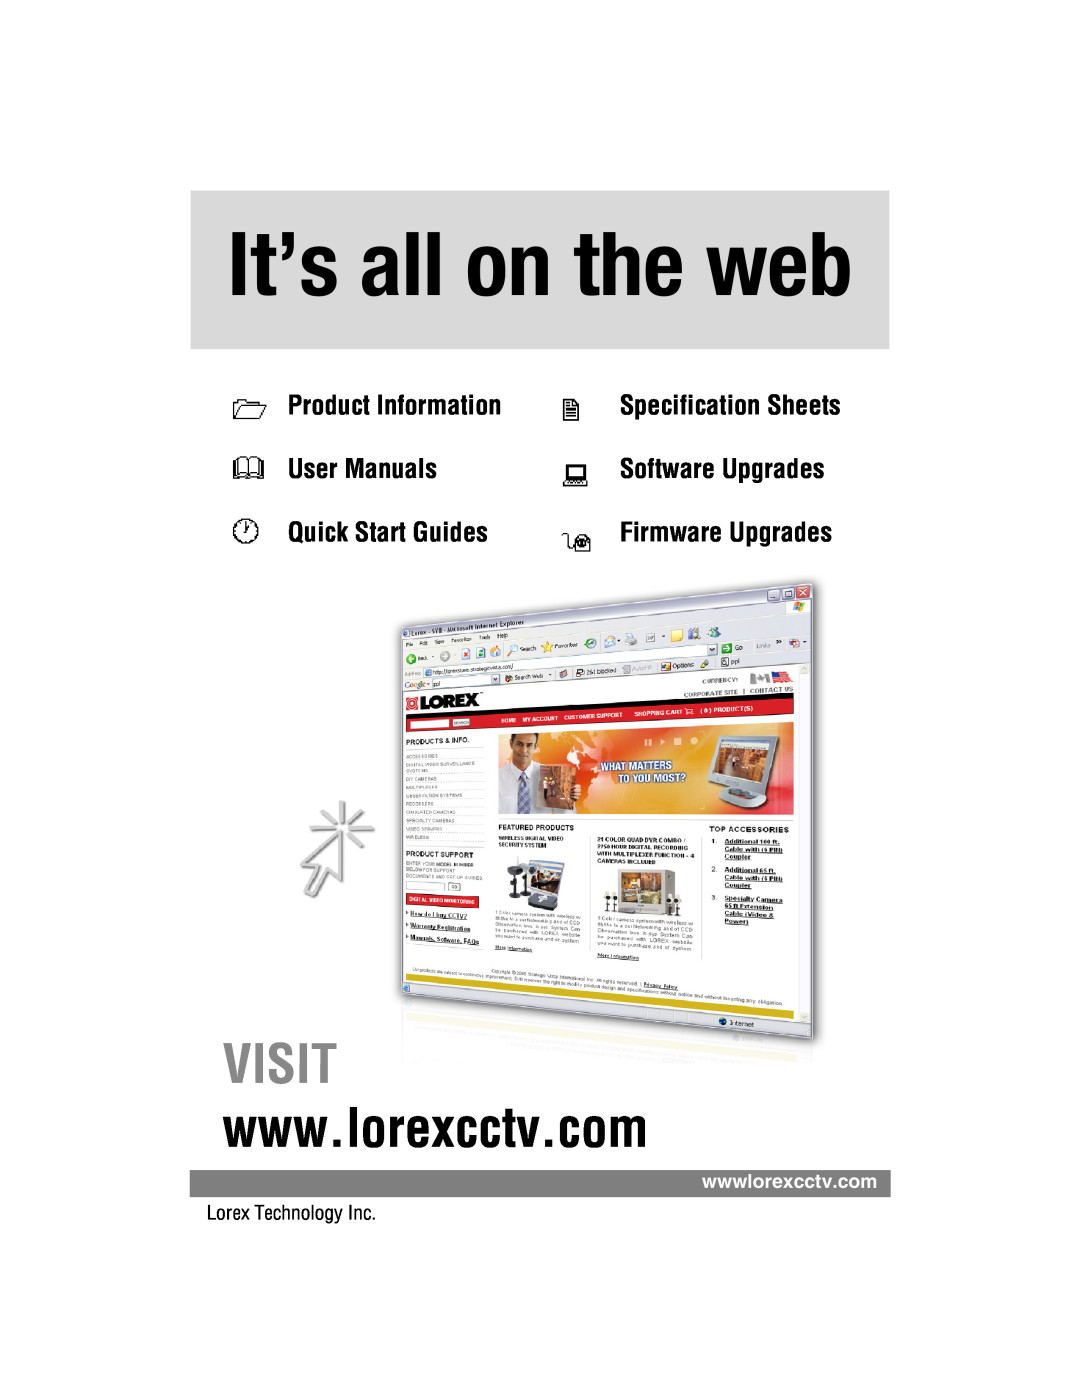 LOREX Technology WA-410 It’s all on the web, Visit, Product Information, Quick Start Guides, Software Upgrades 